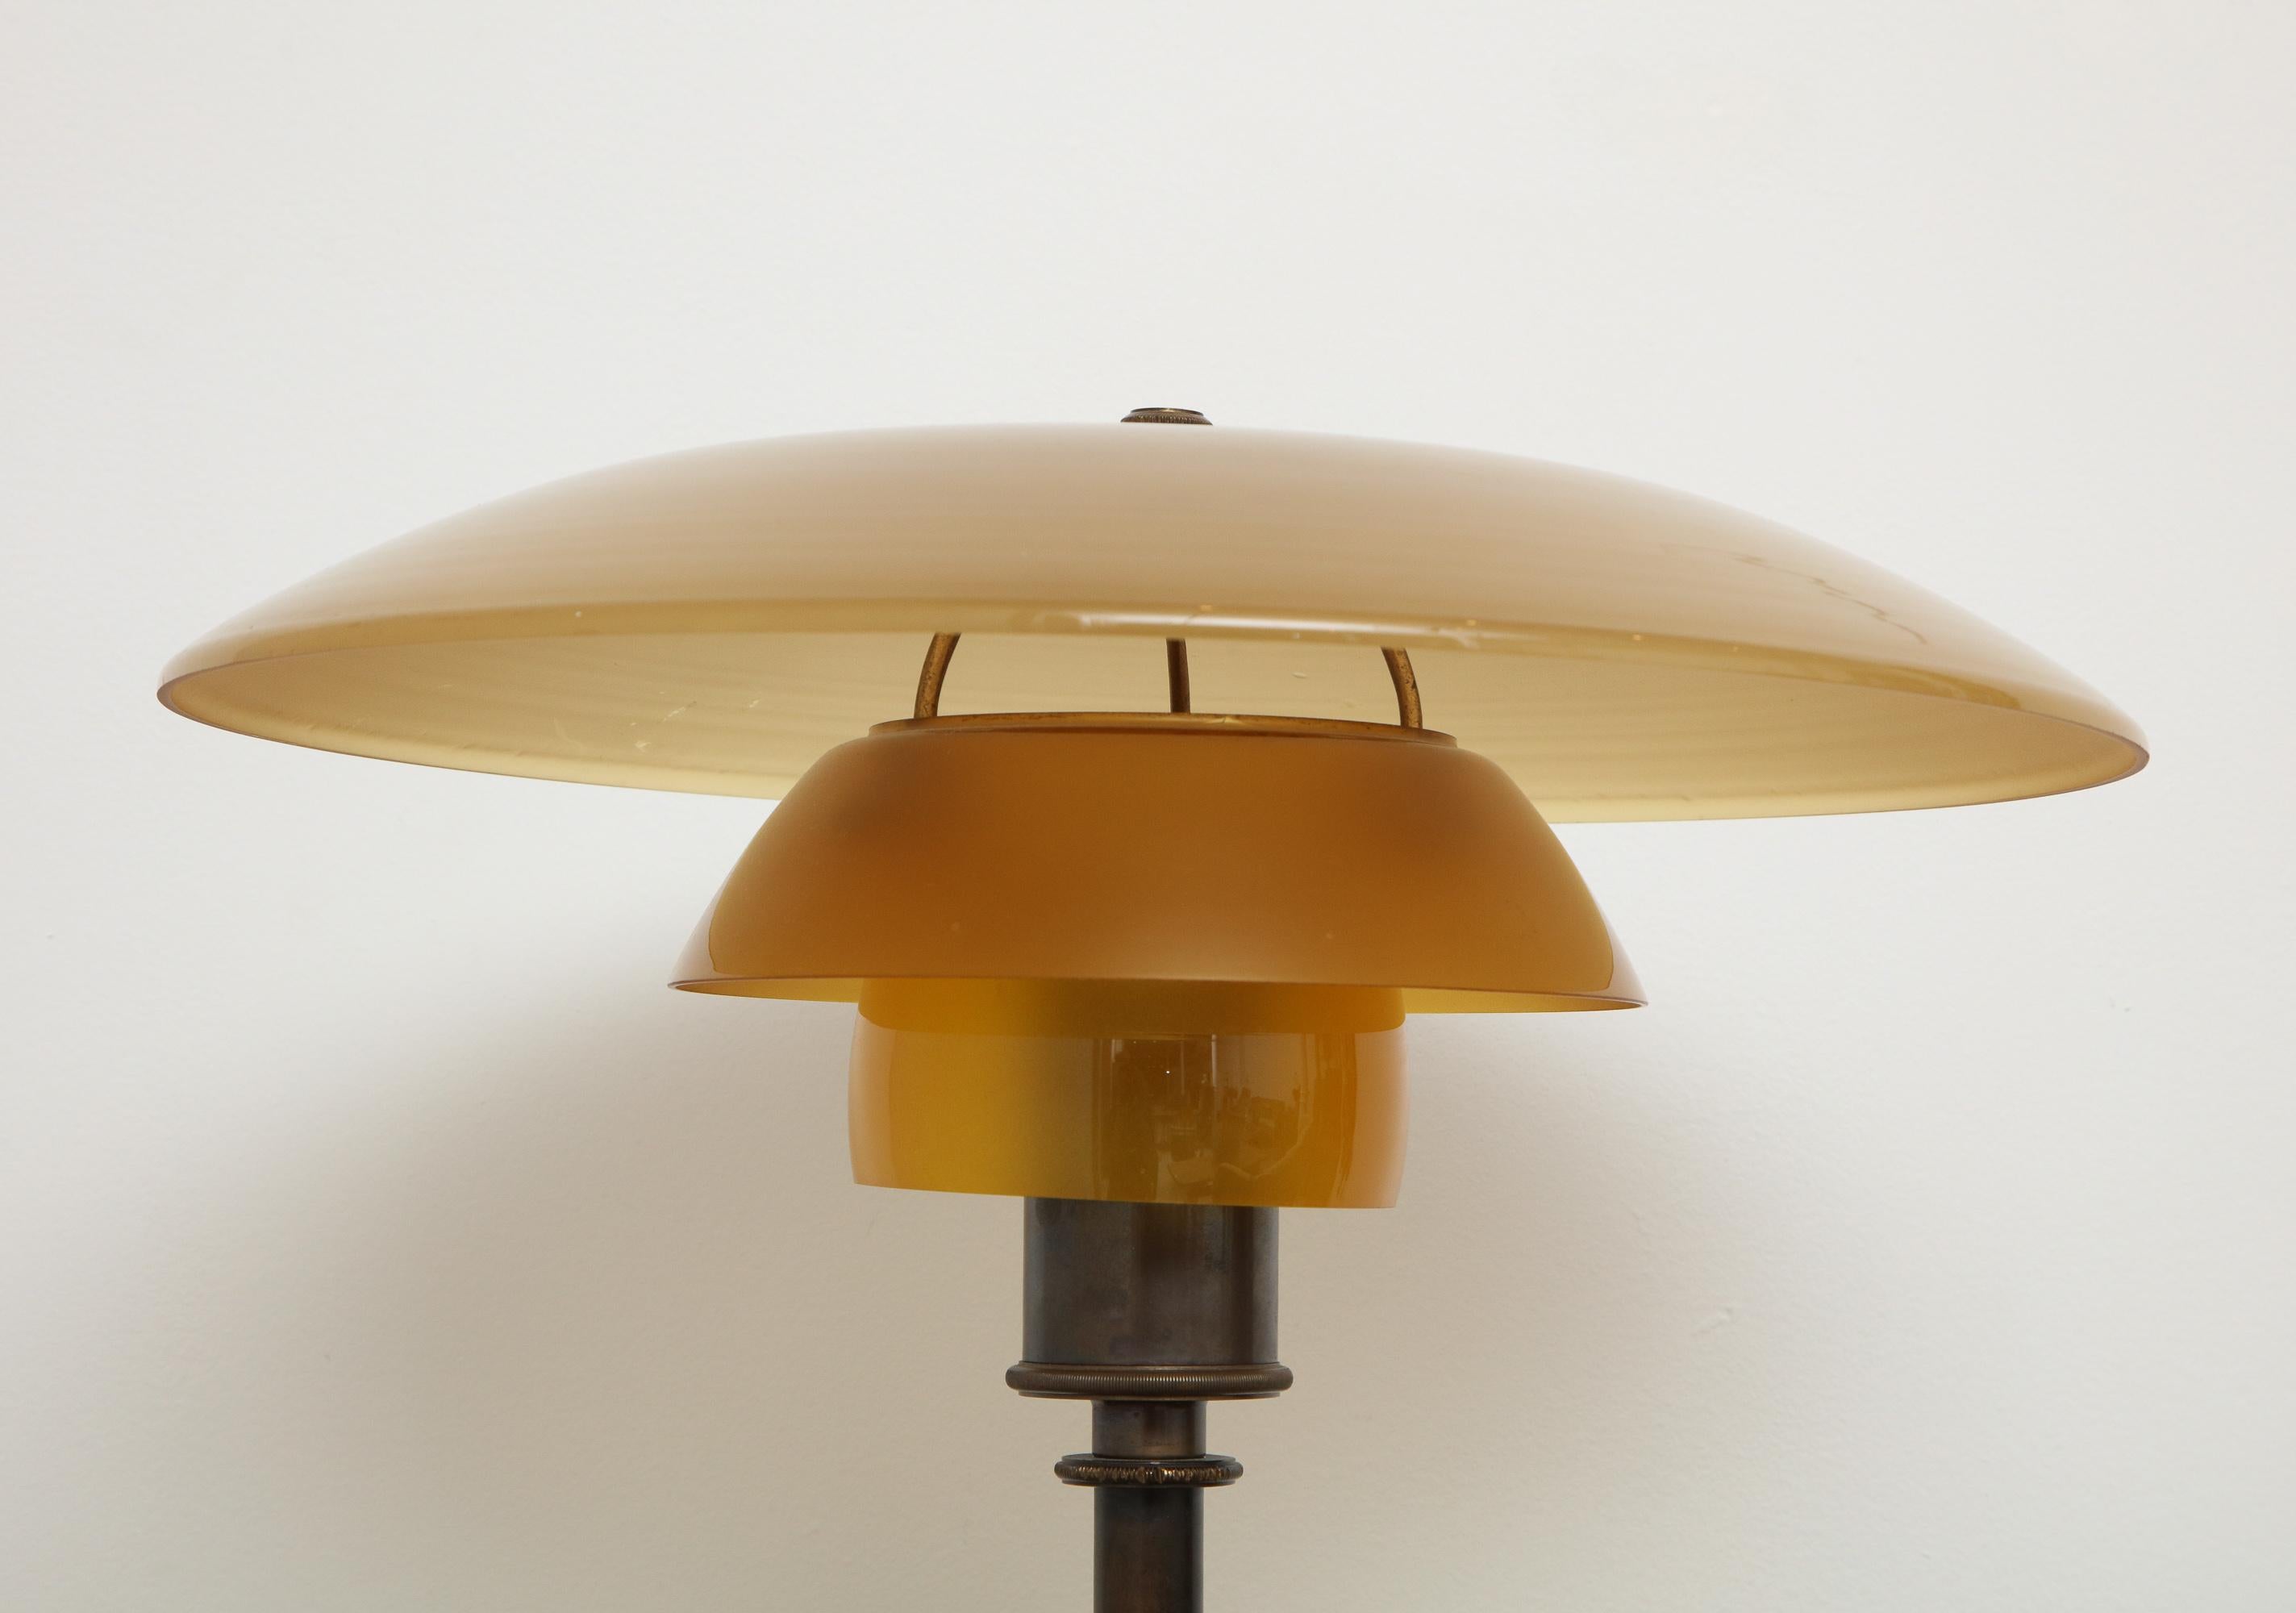 Patinated Poul Henningsen 'PH', Early Table Light, 4/3 Amber Shades, Pat. Appl, 1929